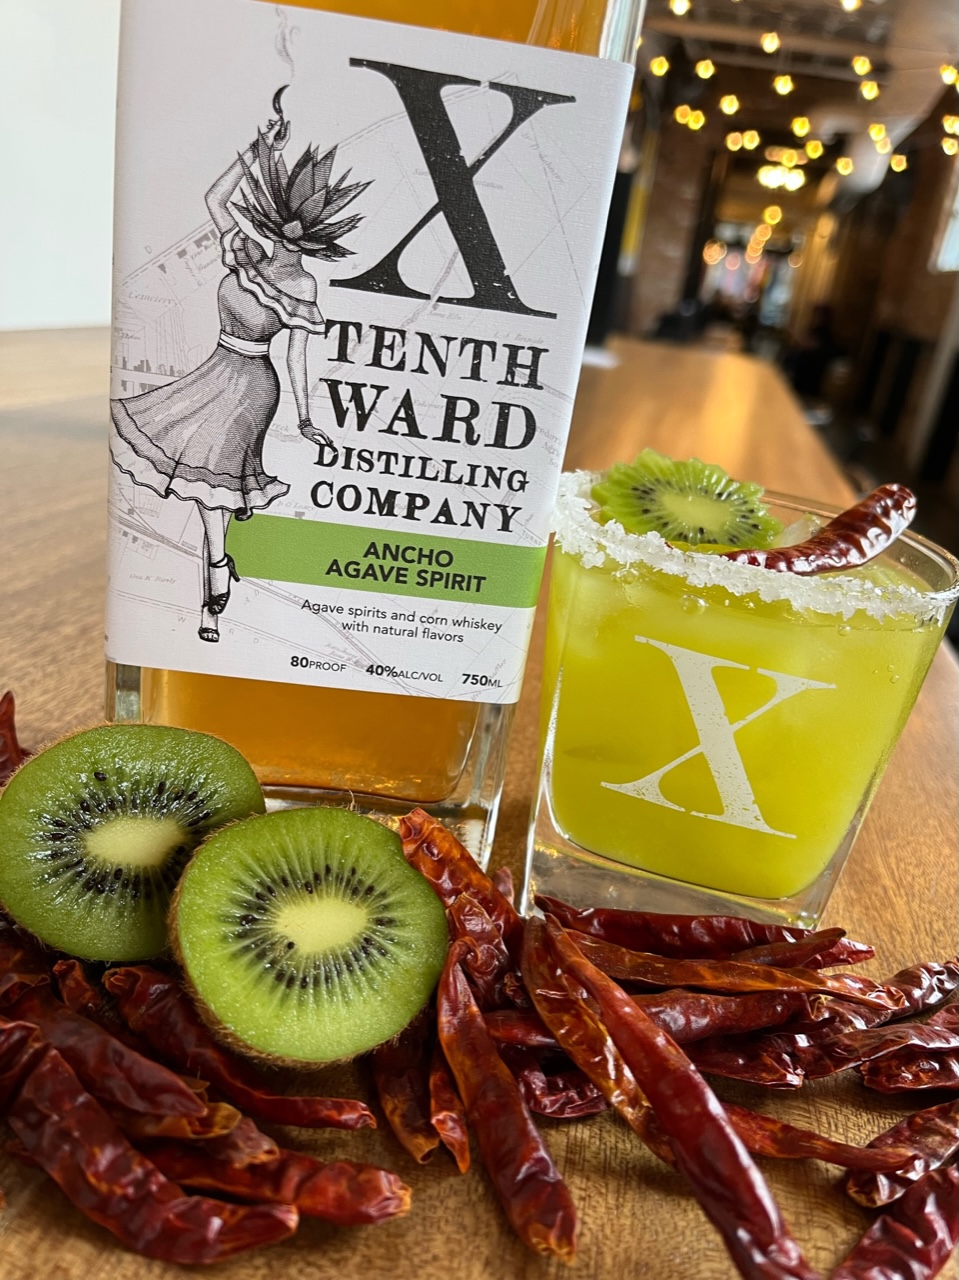 Ancho agave spirit with Margarita Verde